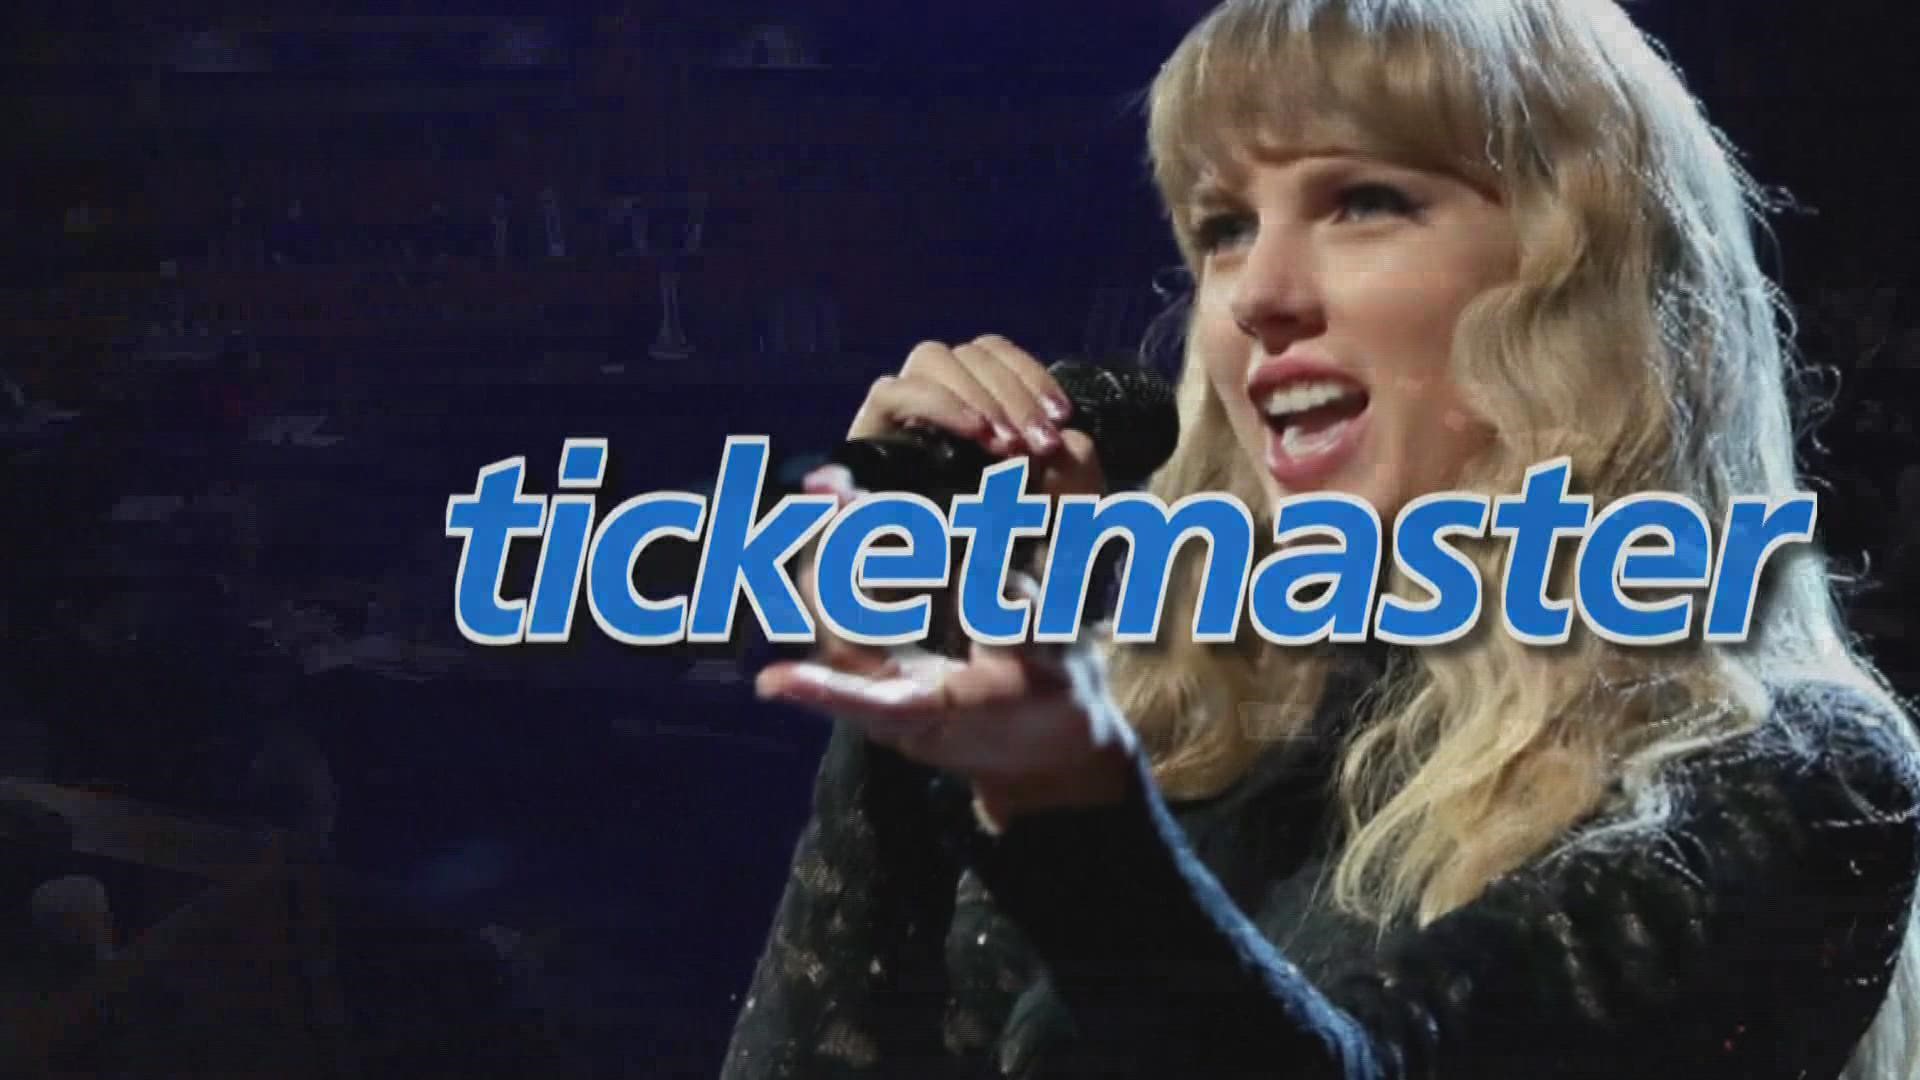 9NEWS Legal analyst Whitney Traylor discusses the head of Live Nation facing tough questions from Senators over how Ticketmaster botched presale tickets.